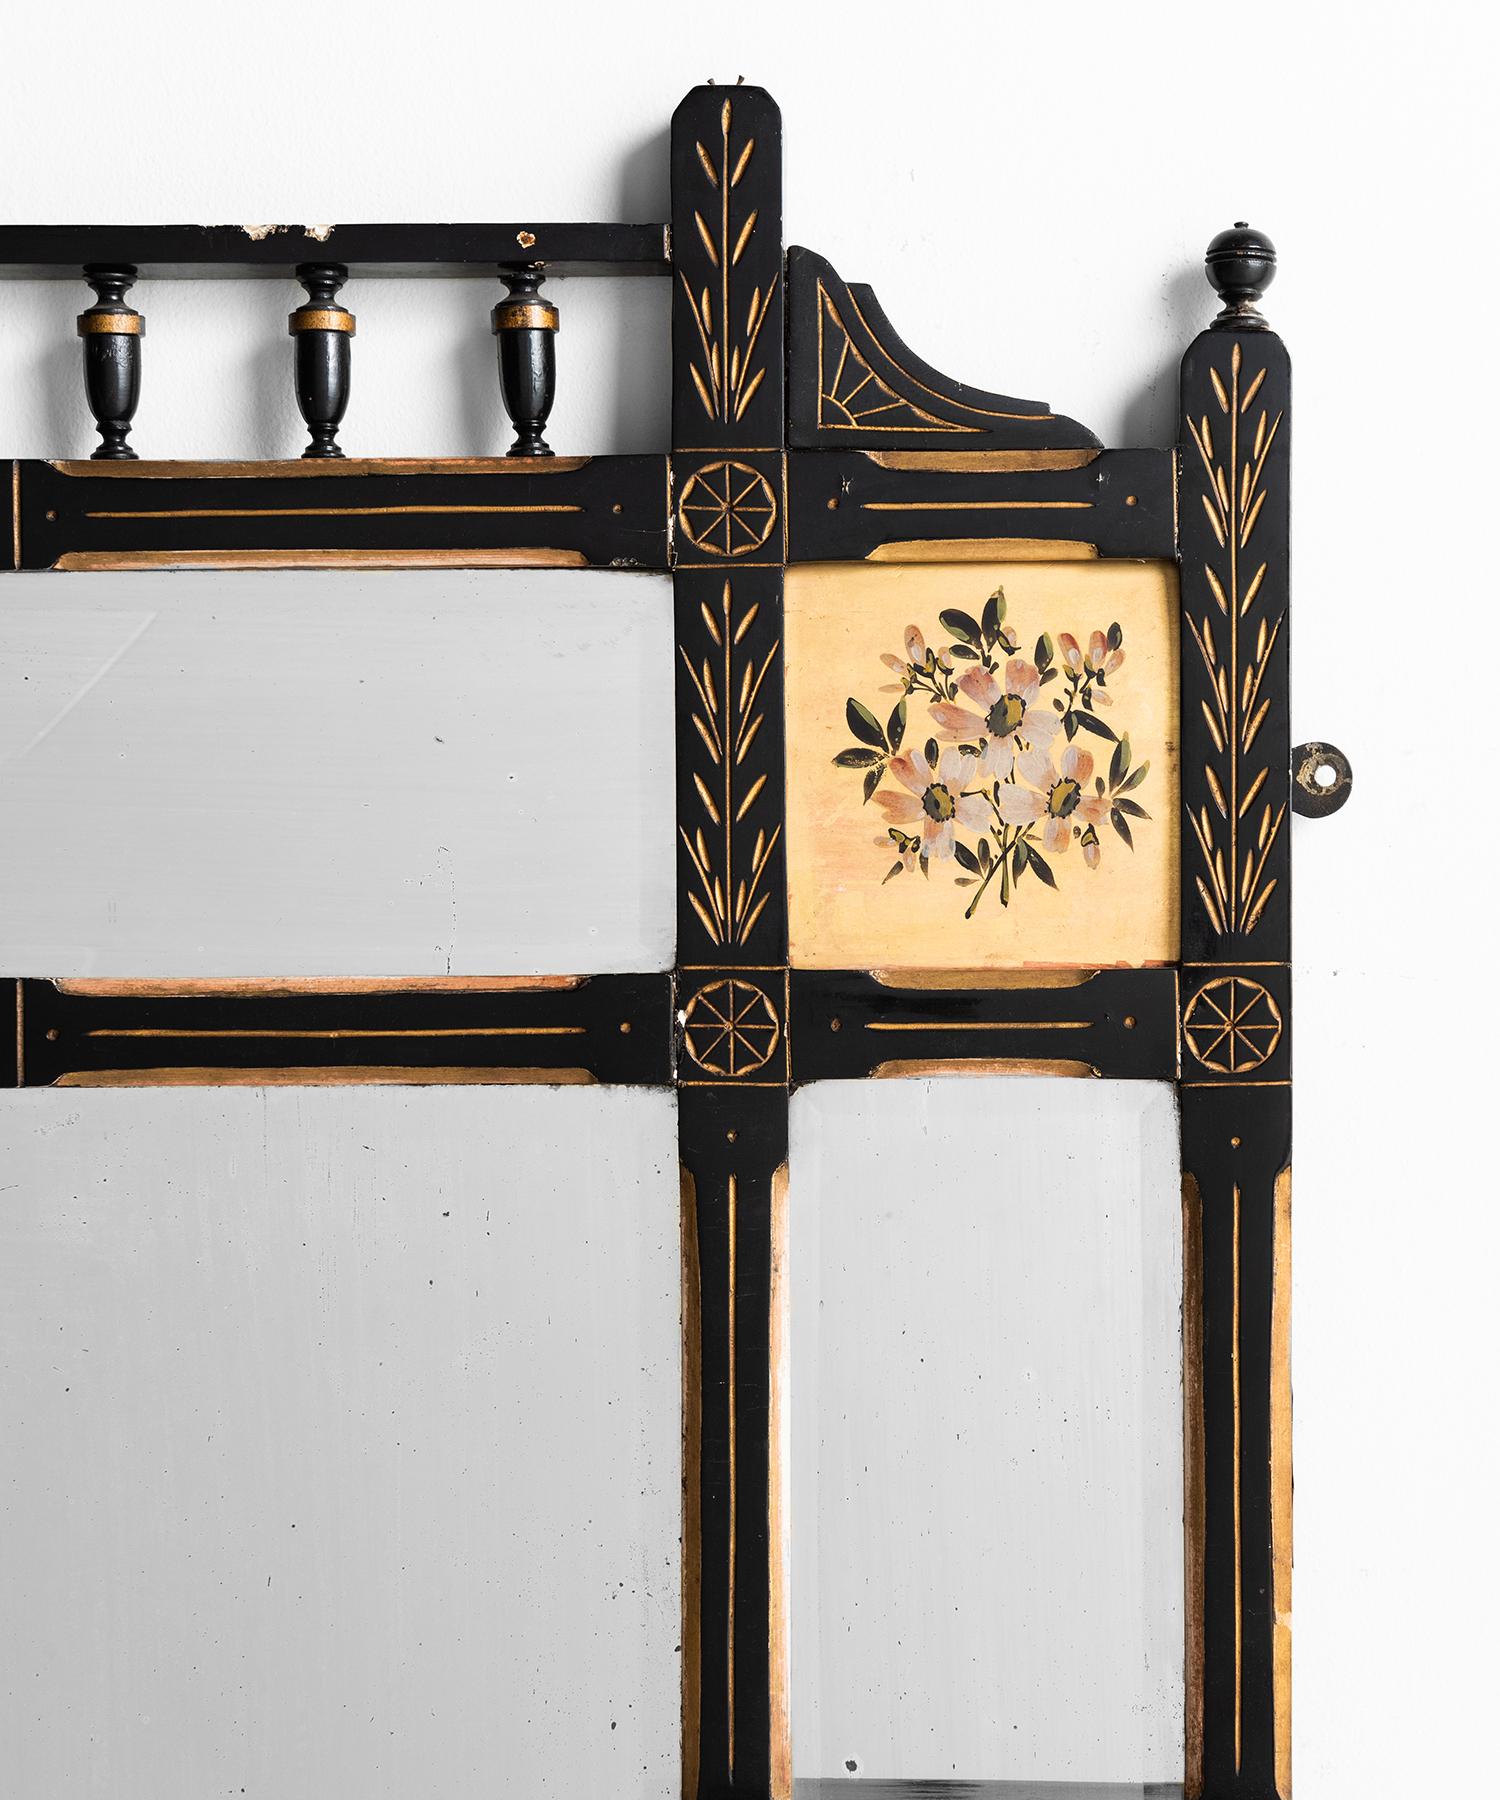 Ebonised finish with gold leaf, decorative inlay and bevelled mirror panels.